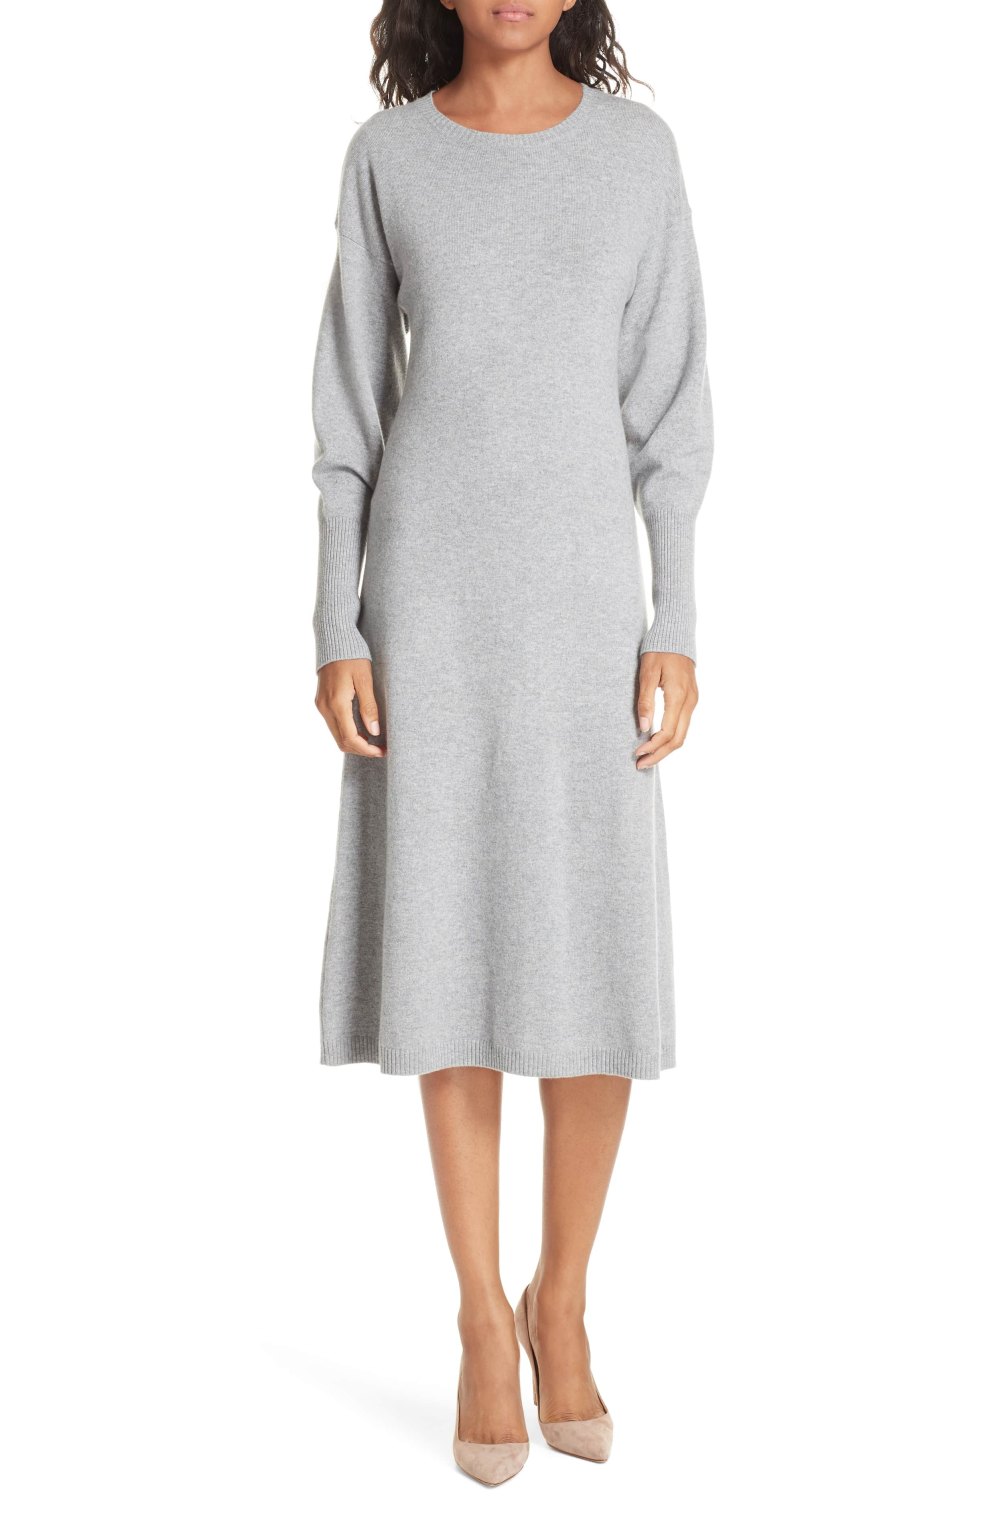 gray sweater dress nordstrom collection